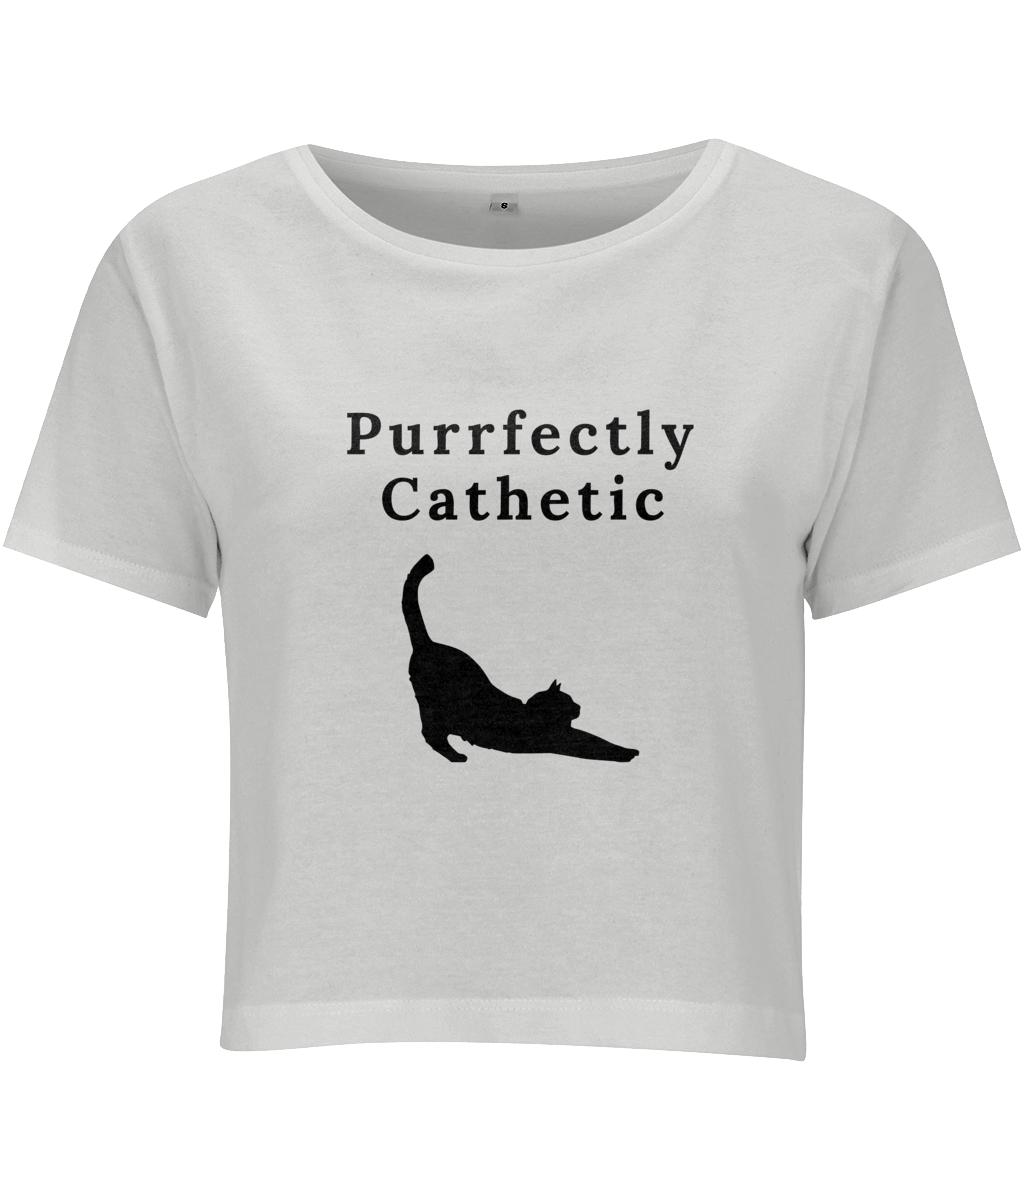 'Purrfectly Cathetic' Cropped Top - squishbeans